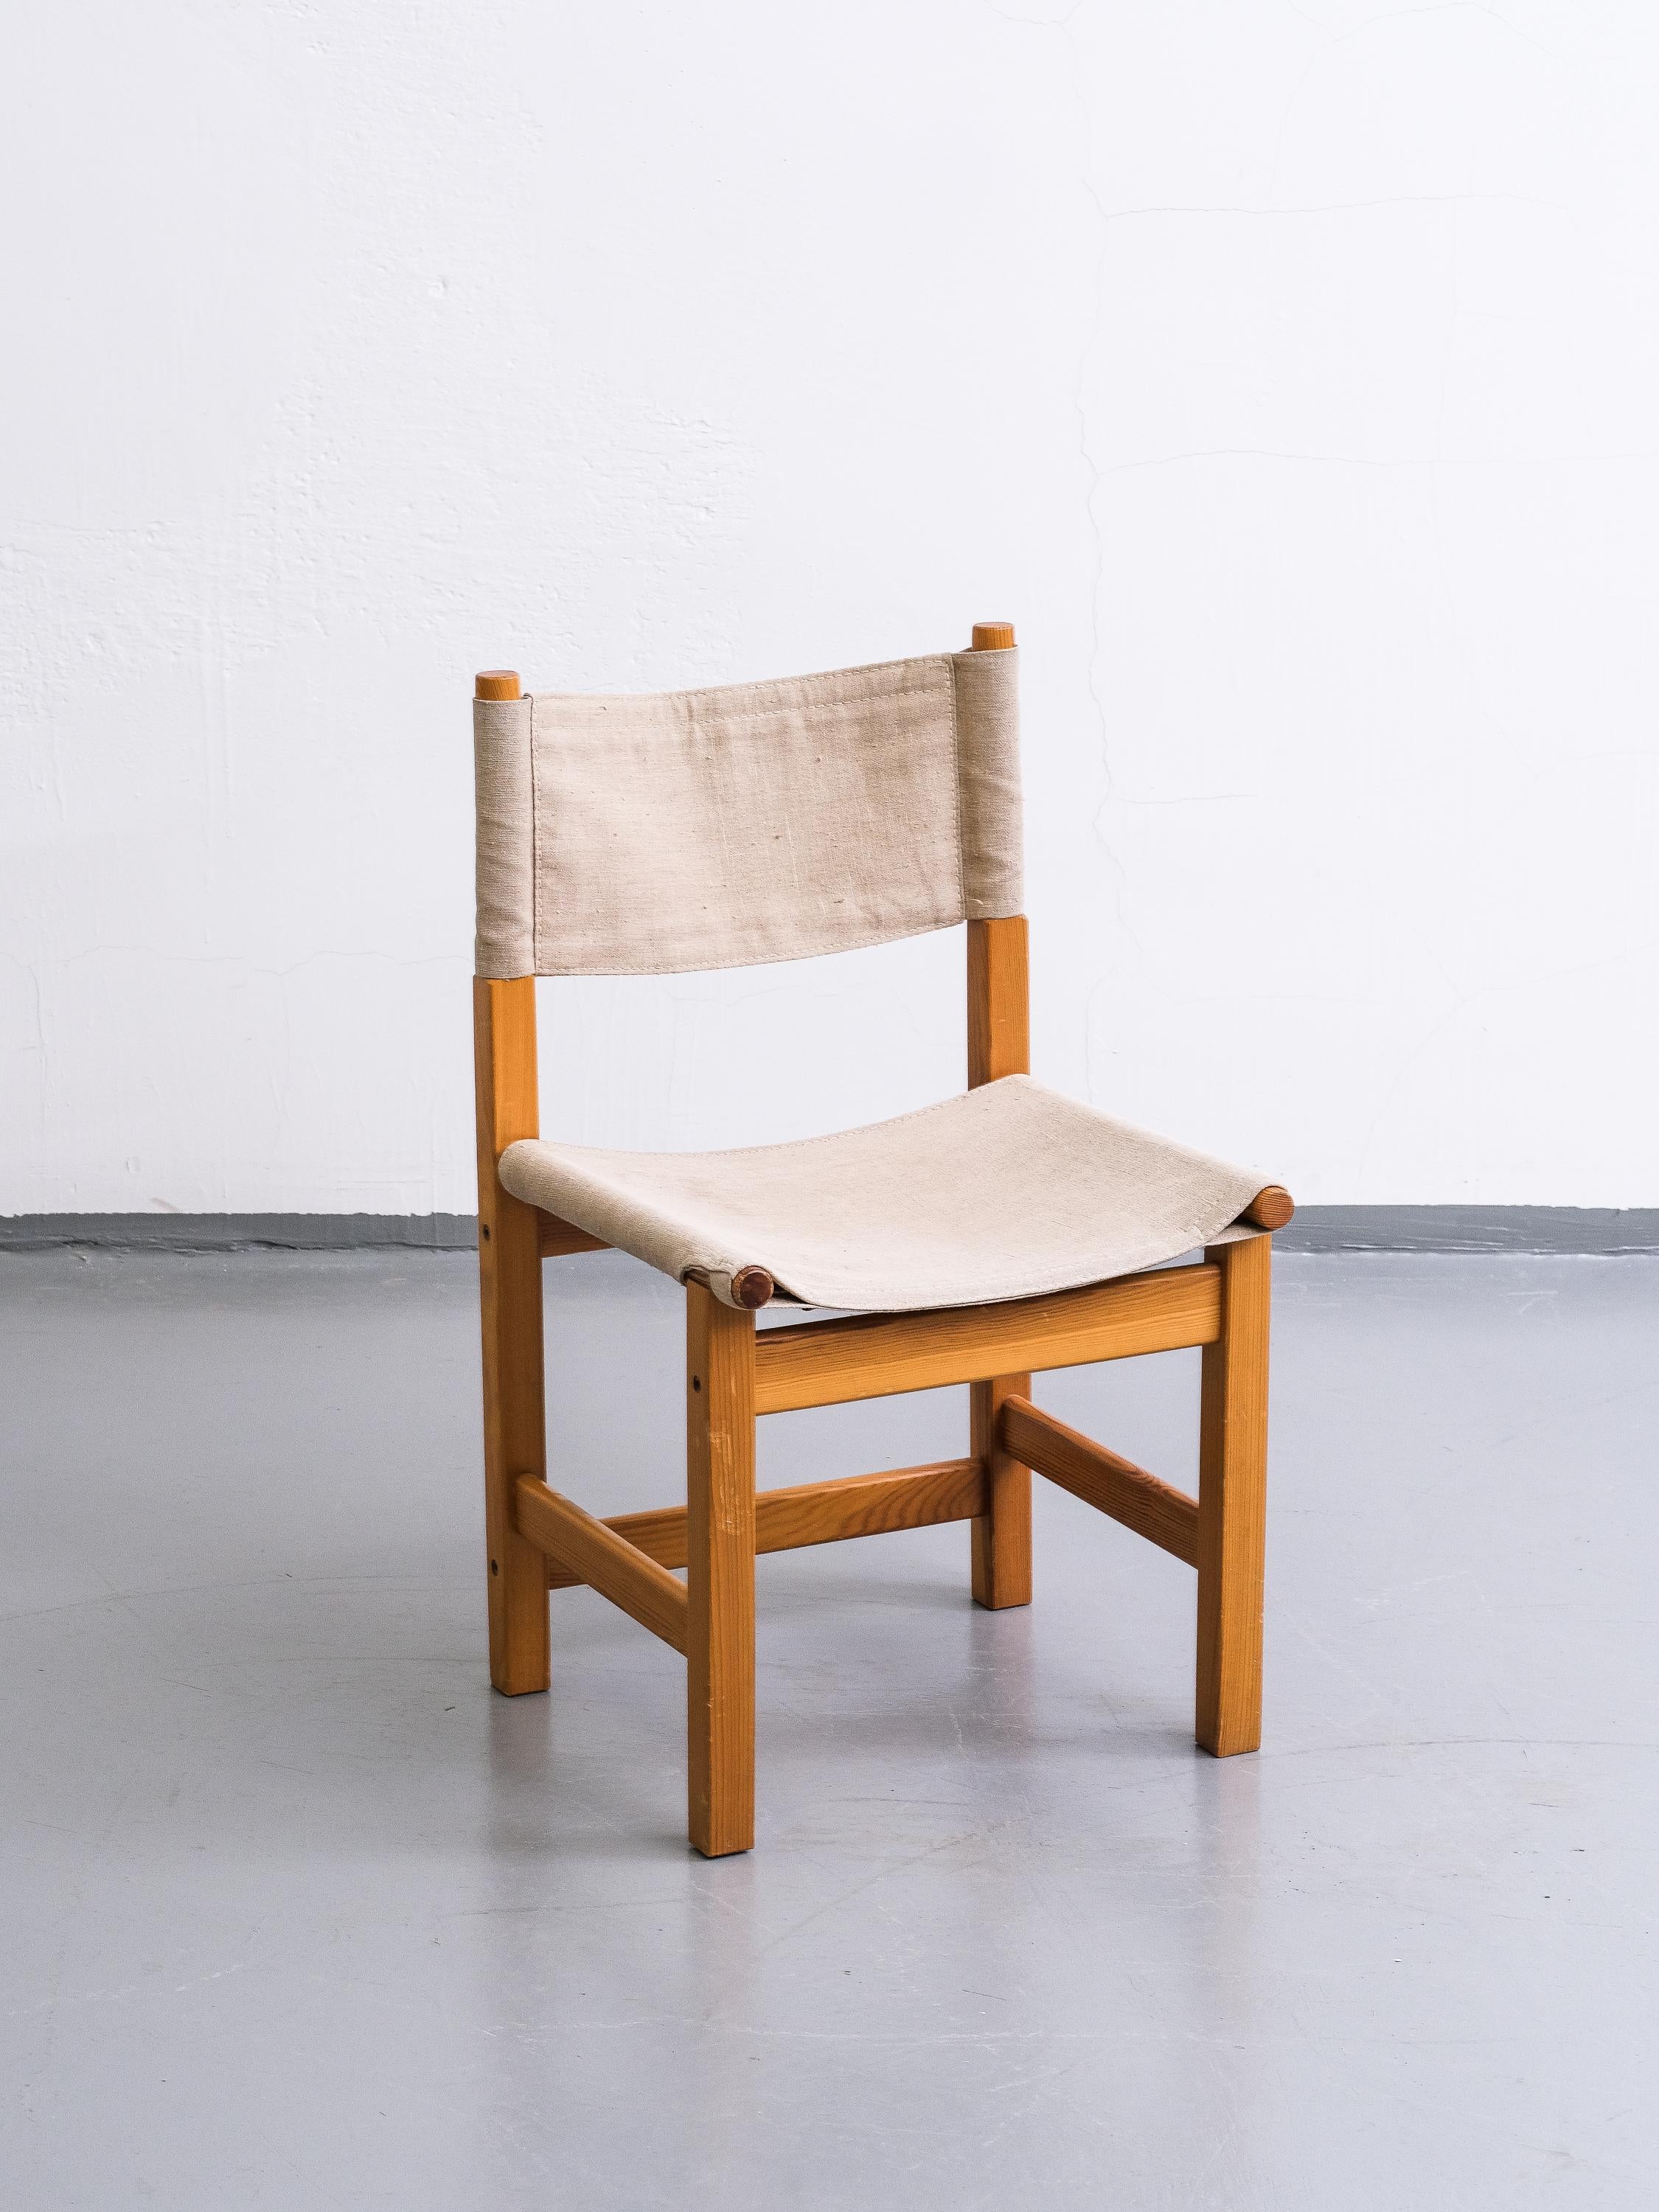 Rare 1970s vintage chair, design by Tomas Jelinek for Ikea. Chair frame is made of solid pine wood, seat and back is made of linen.